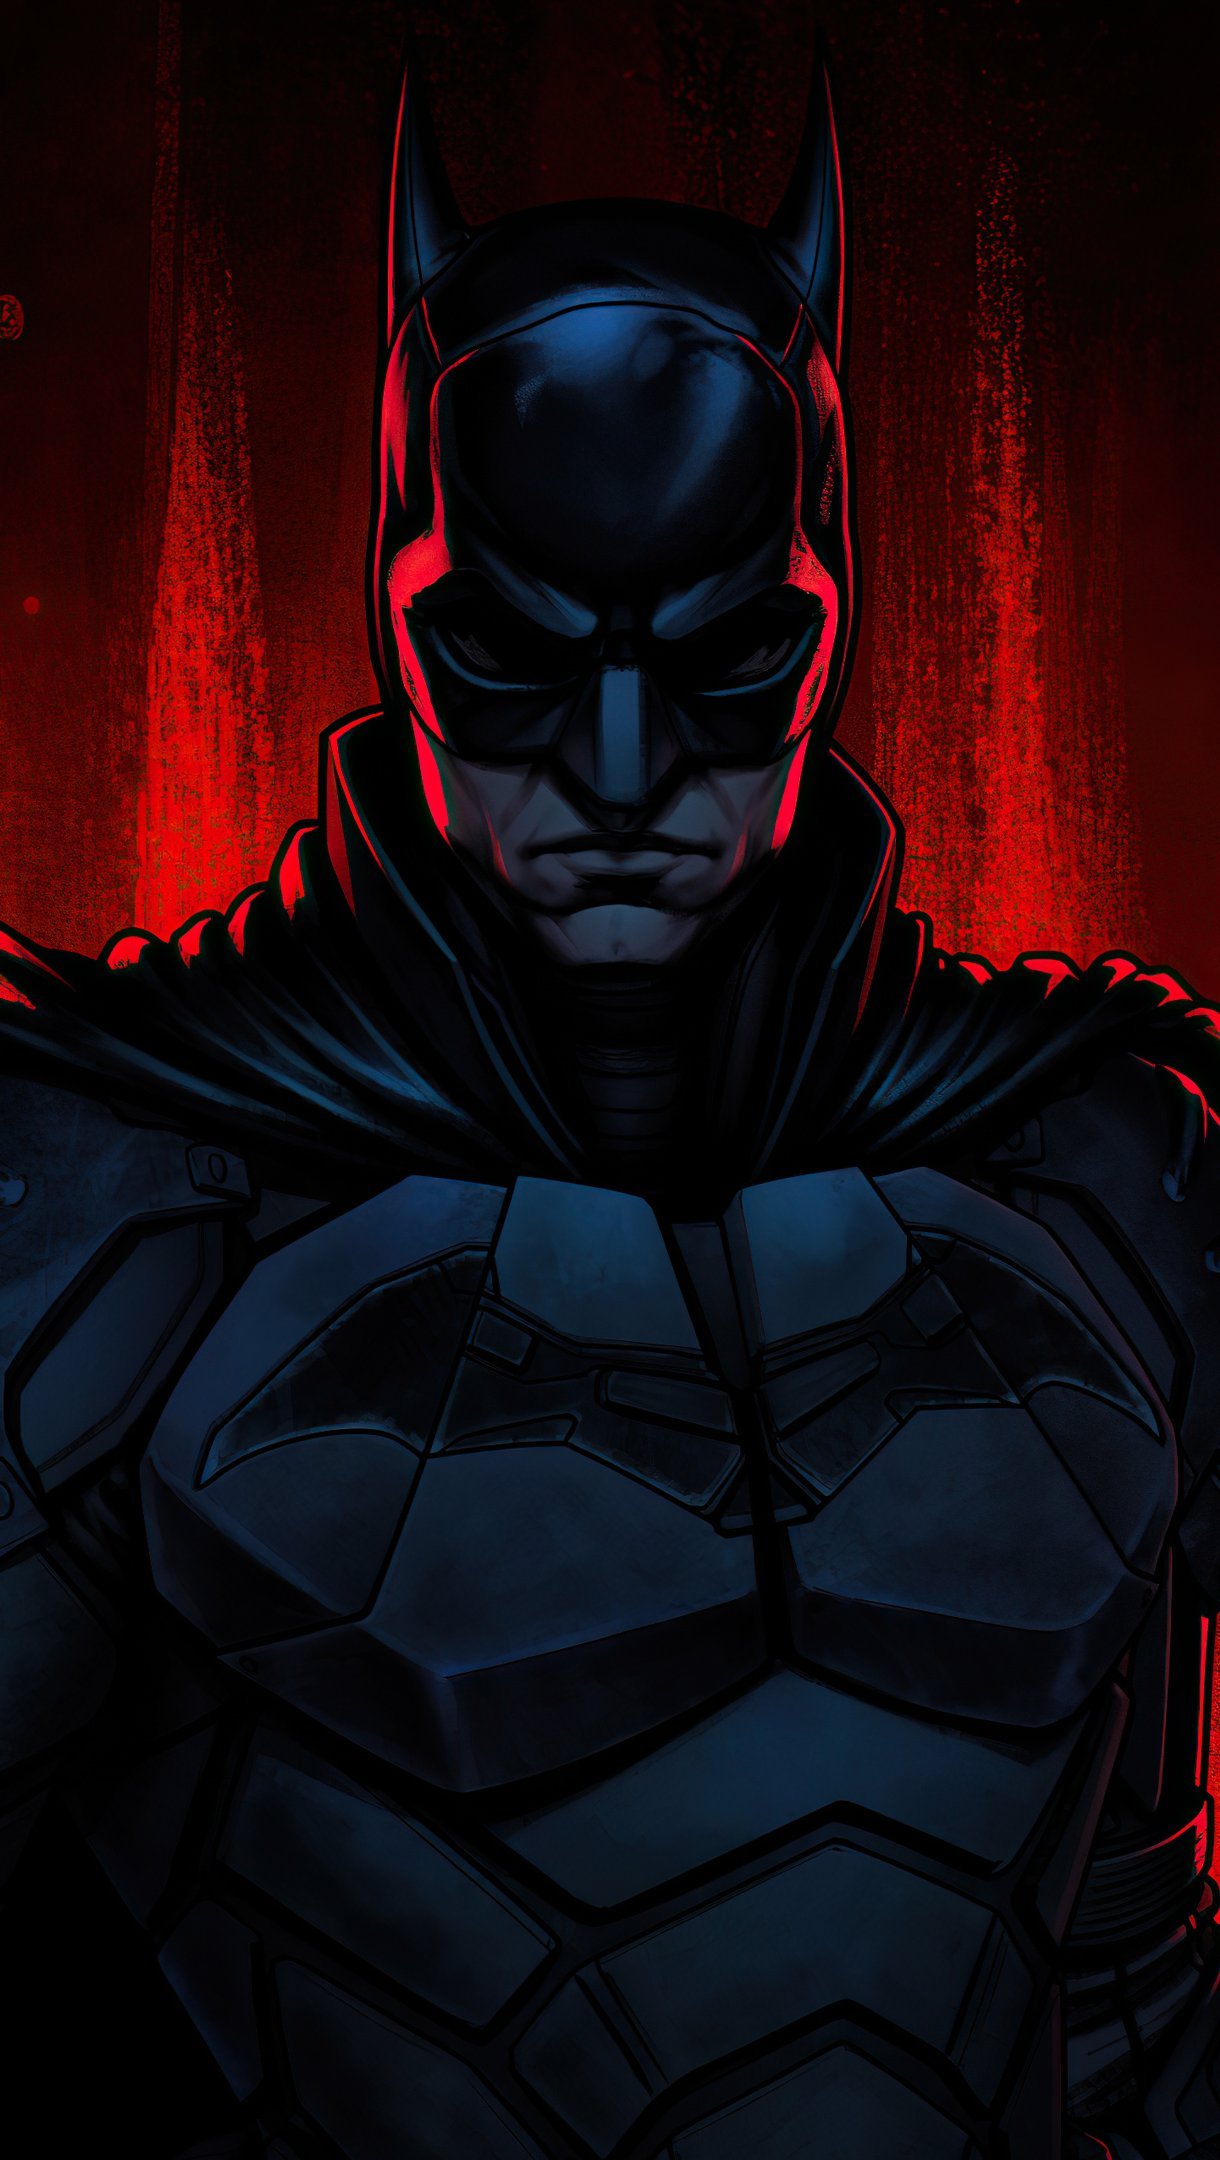 The Batman with red background Wallpaper 4k Ultra HD ID:6426